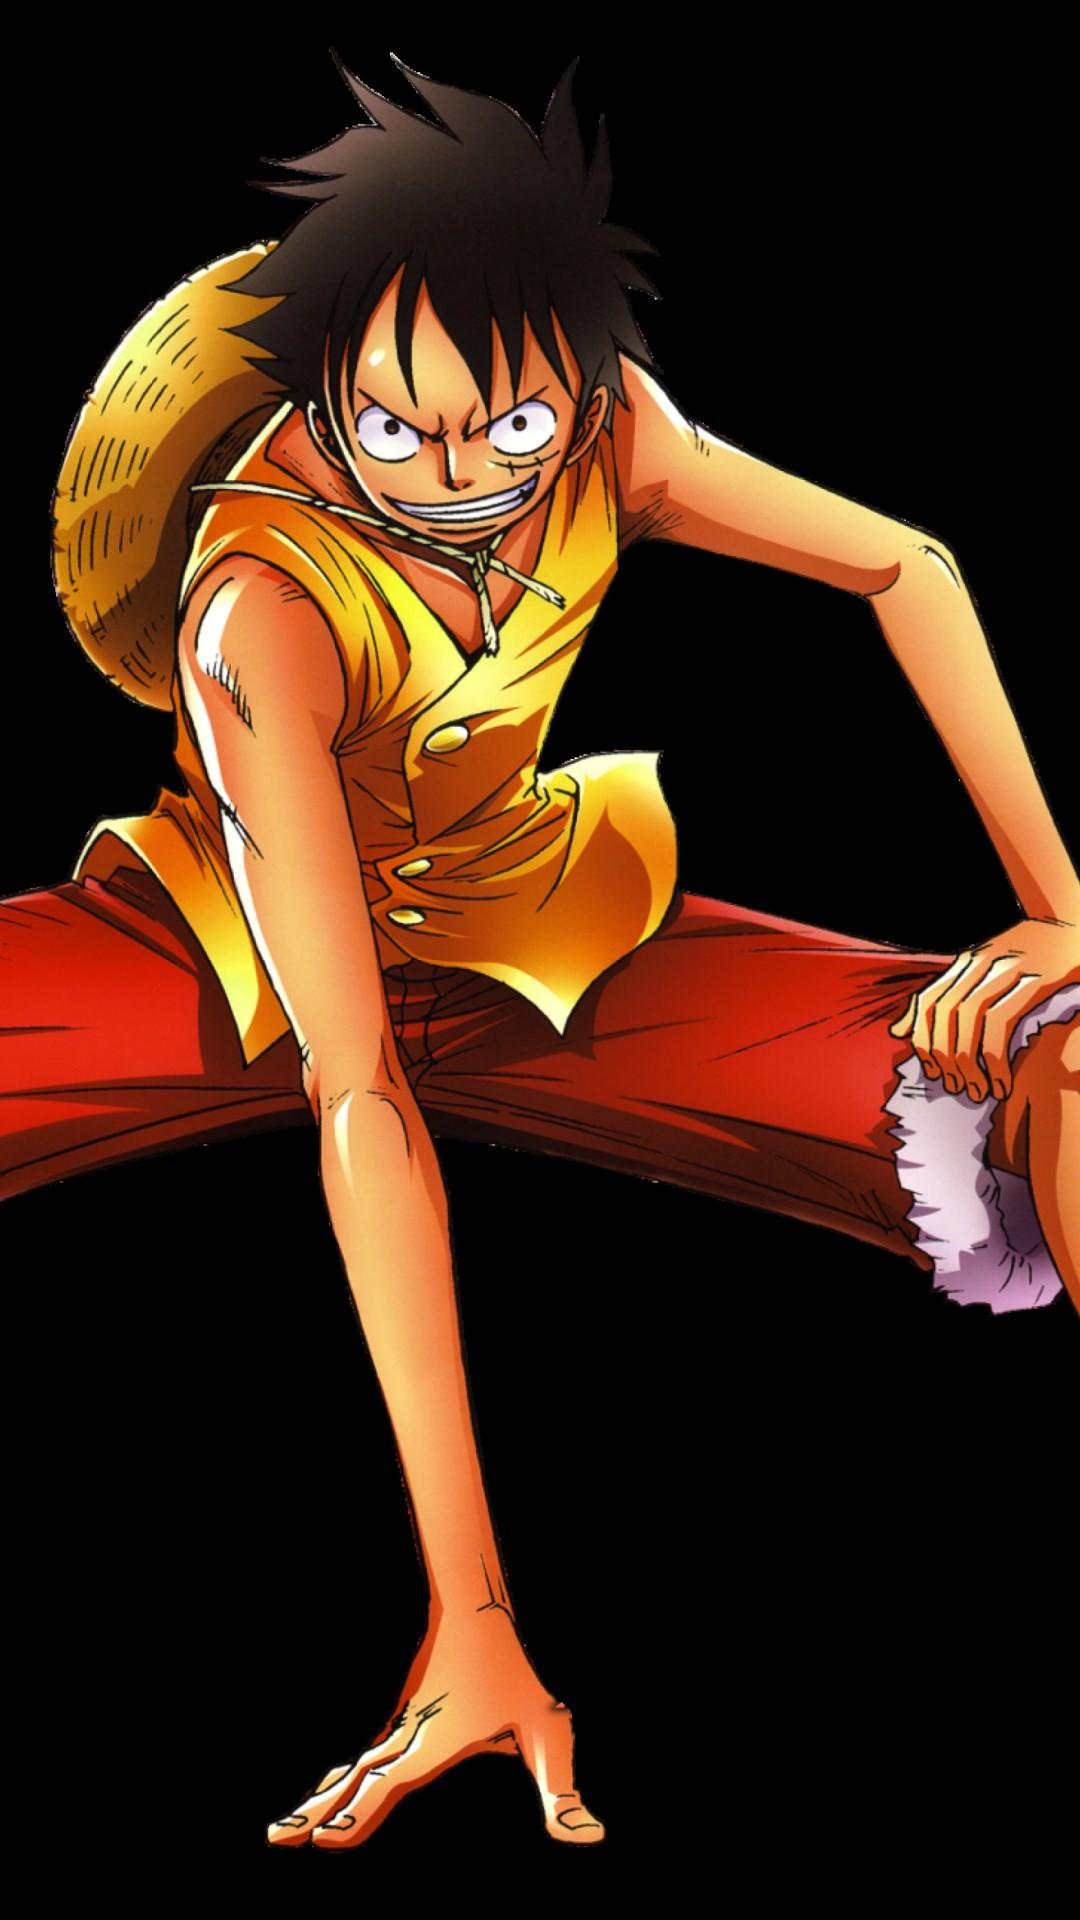 1080 x 1920 · jpeg - One Piece iPhone Wallpaper (76+ images)